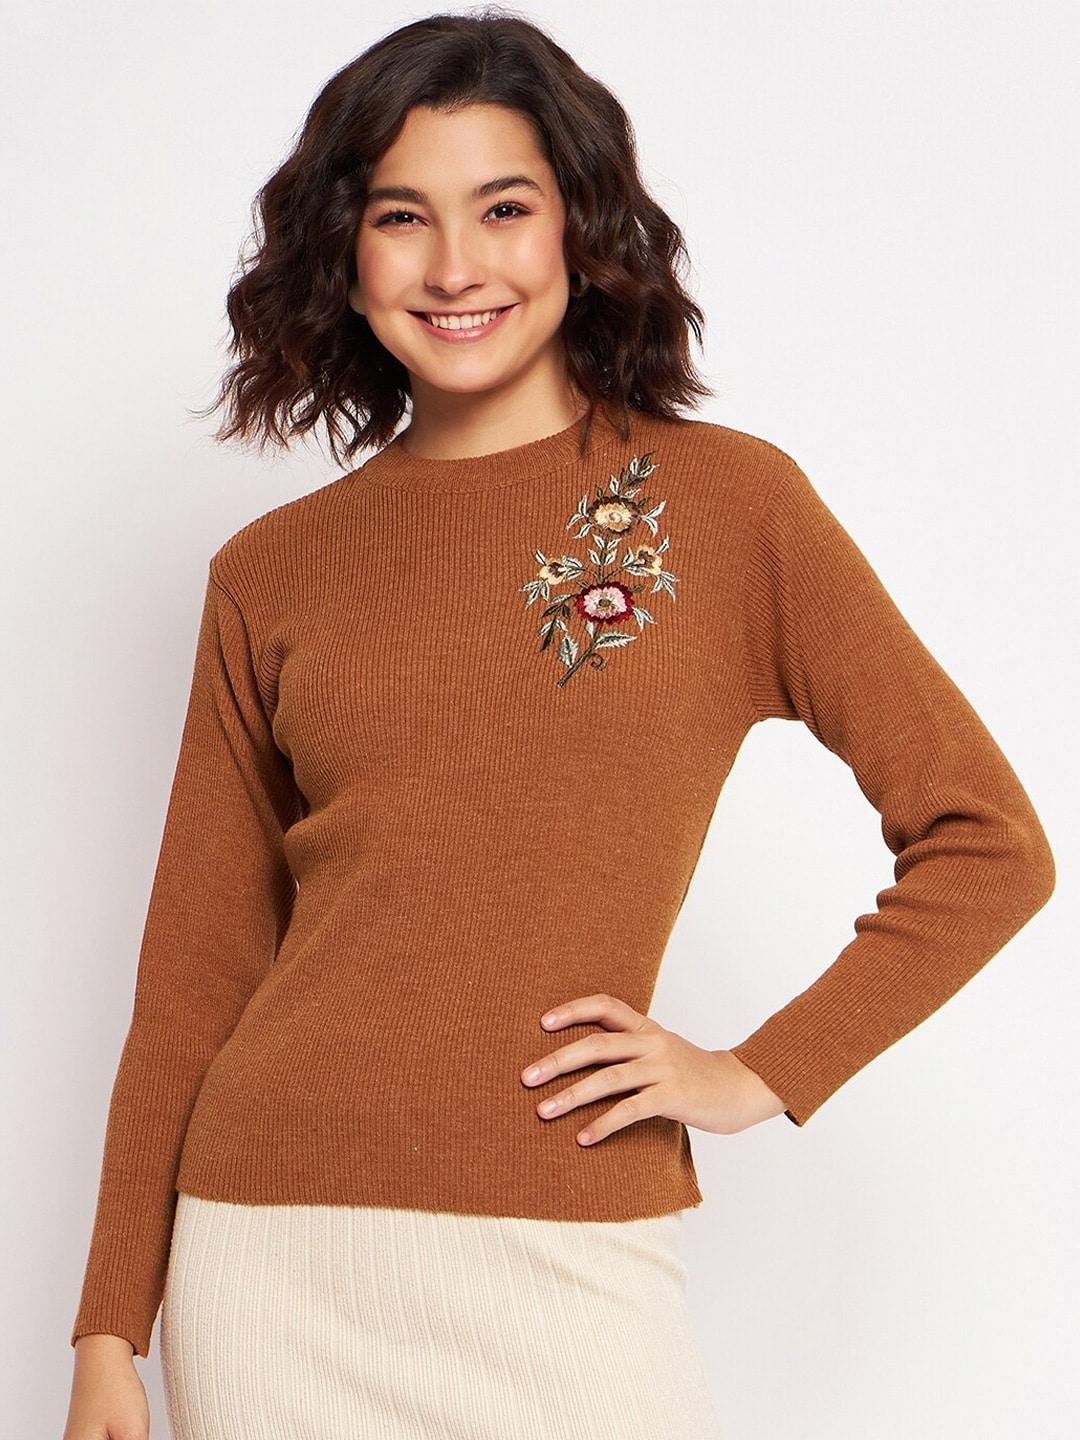 clapton ribbed floral embroidered pullover sweater